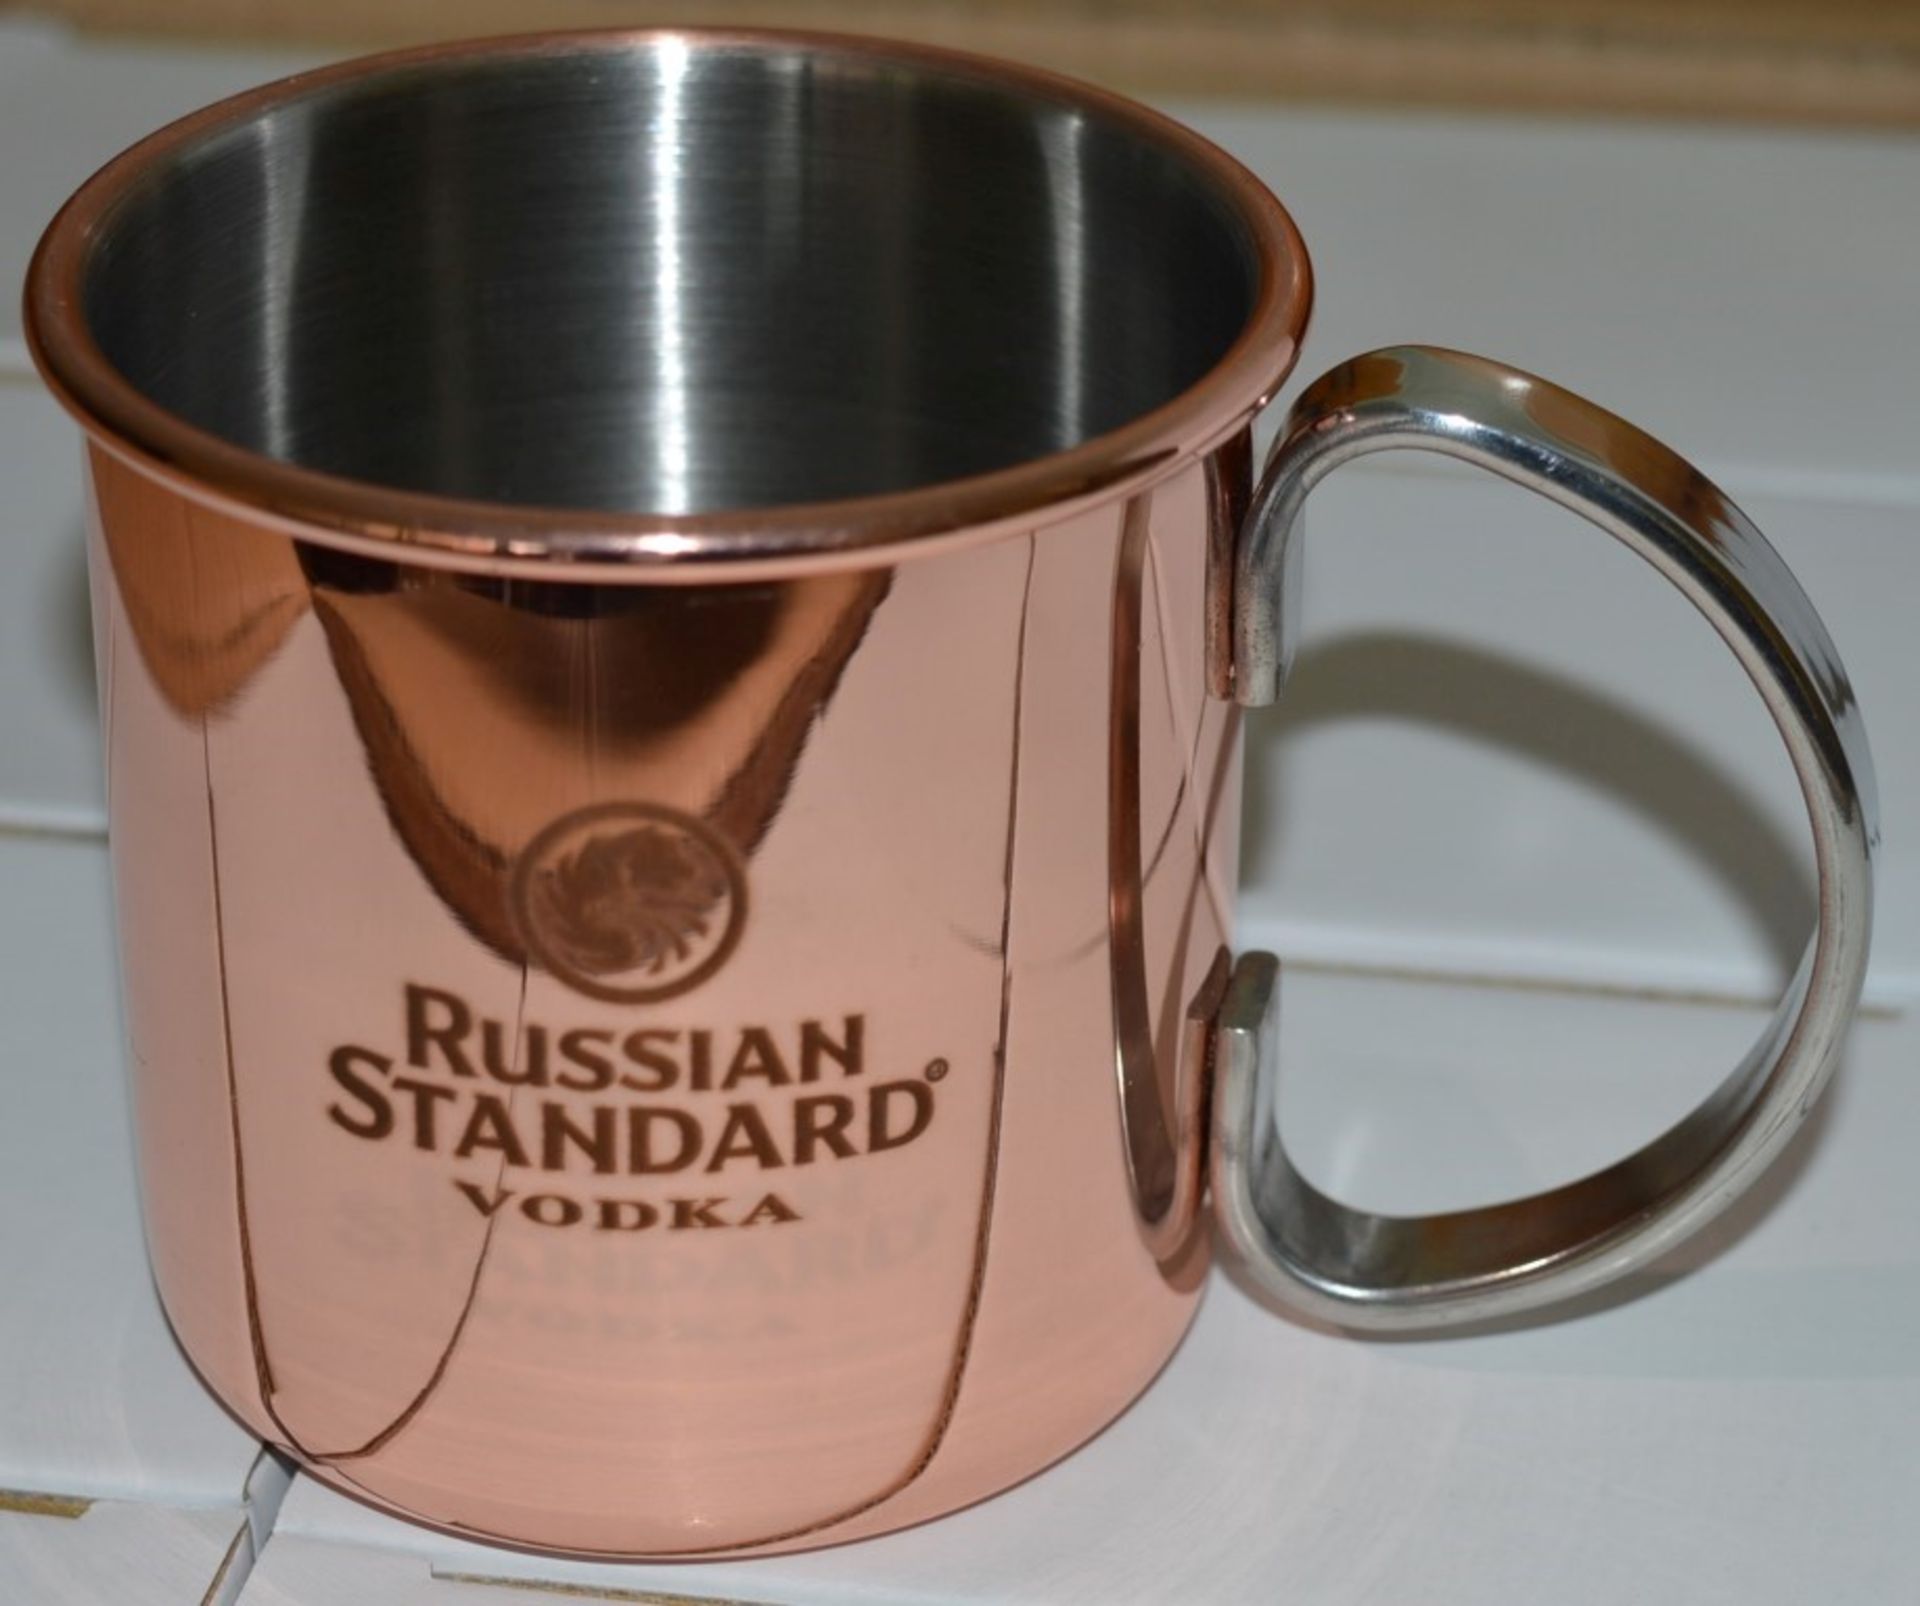 48 x Russian Standard Vodka Copper Mugs - Officially Used to Server Moscow Mule - Copper on the